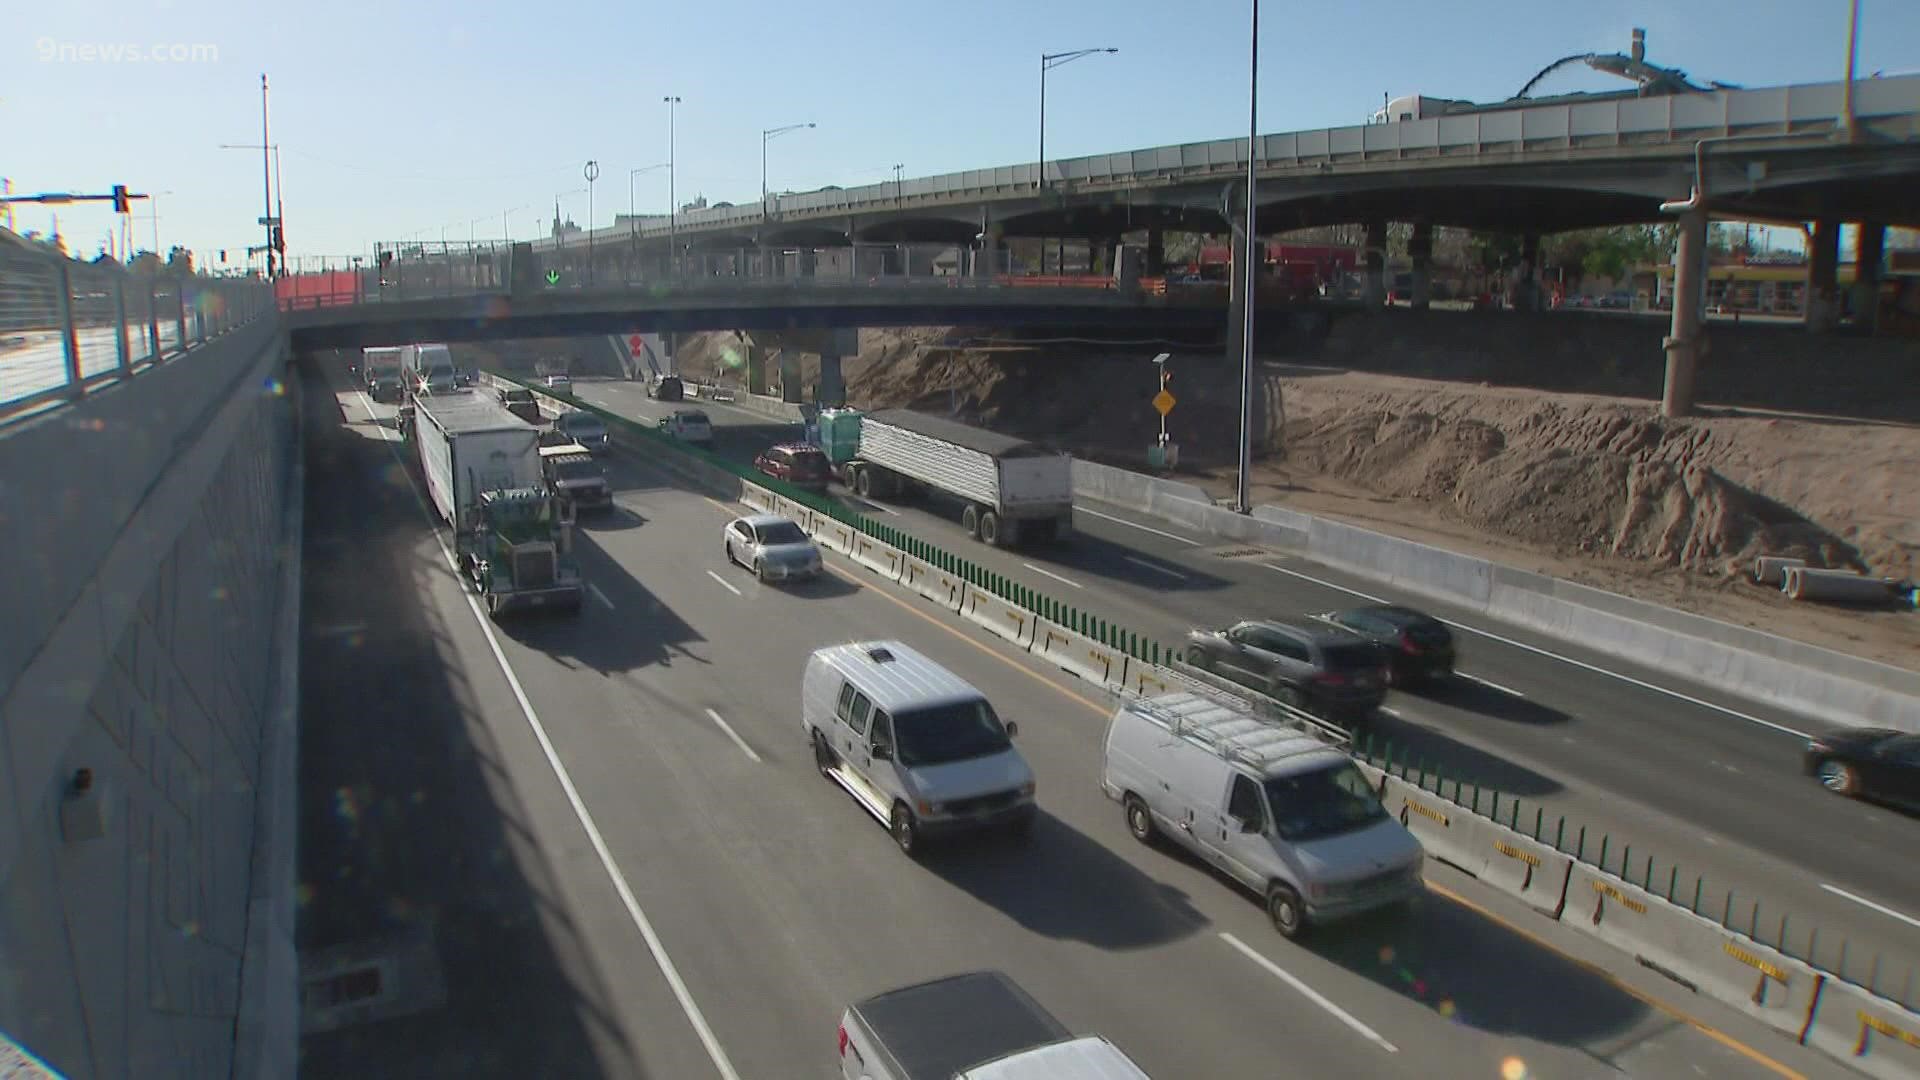 With more congestion on the roads recently, we spoke with CDOT about the increase in commuters, ways to beat the traffic and how to stay safe on the roads.